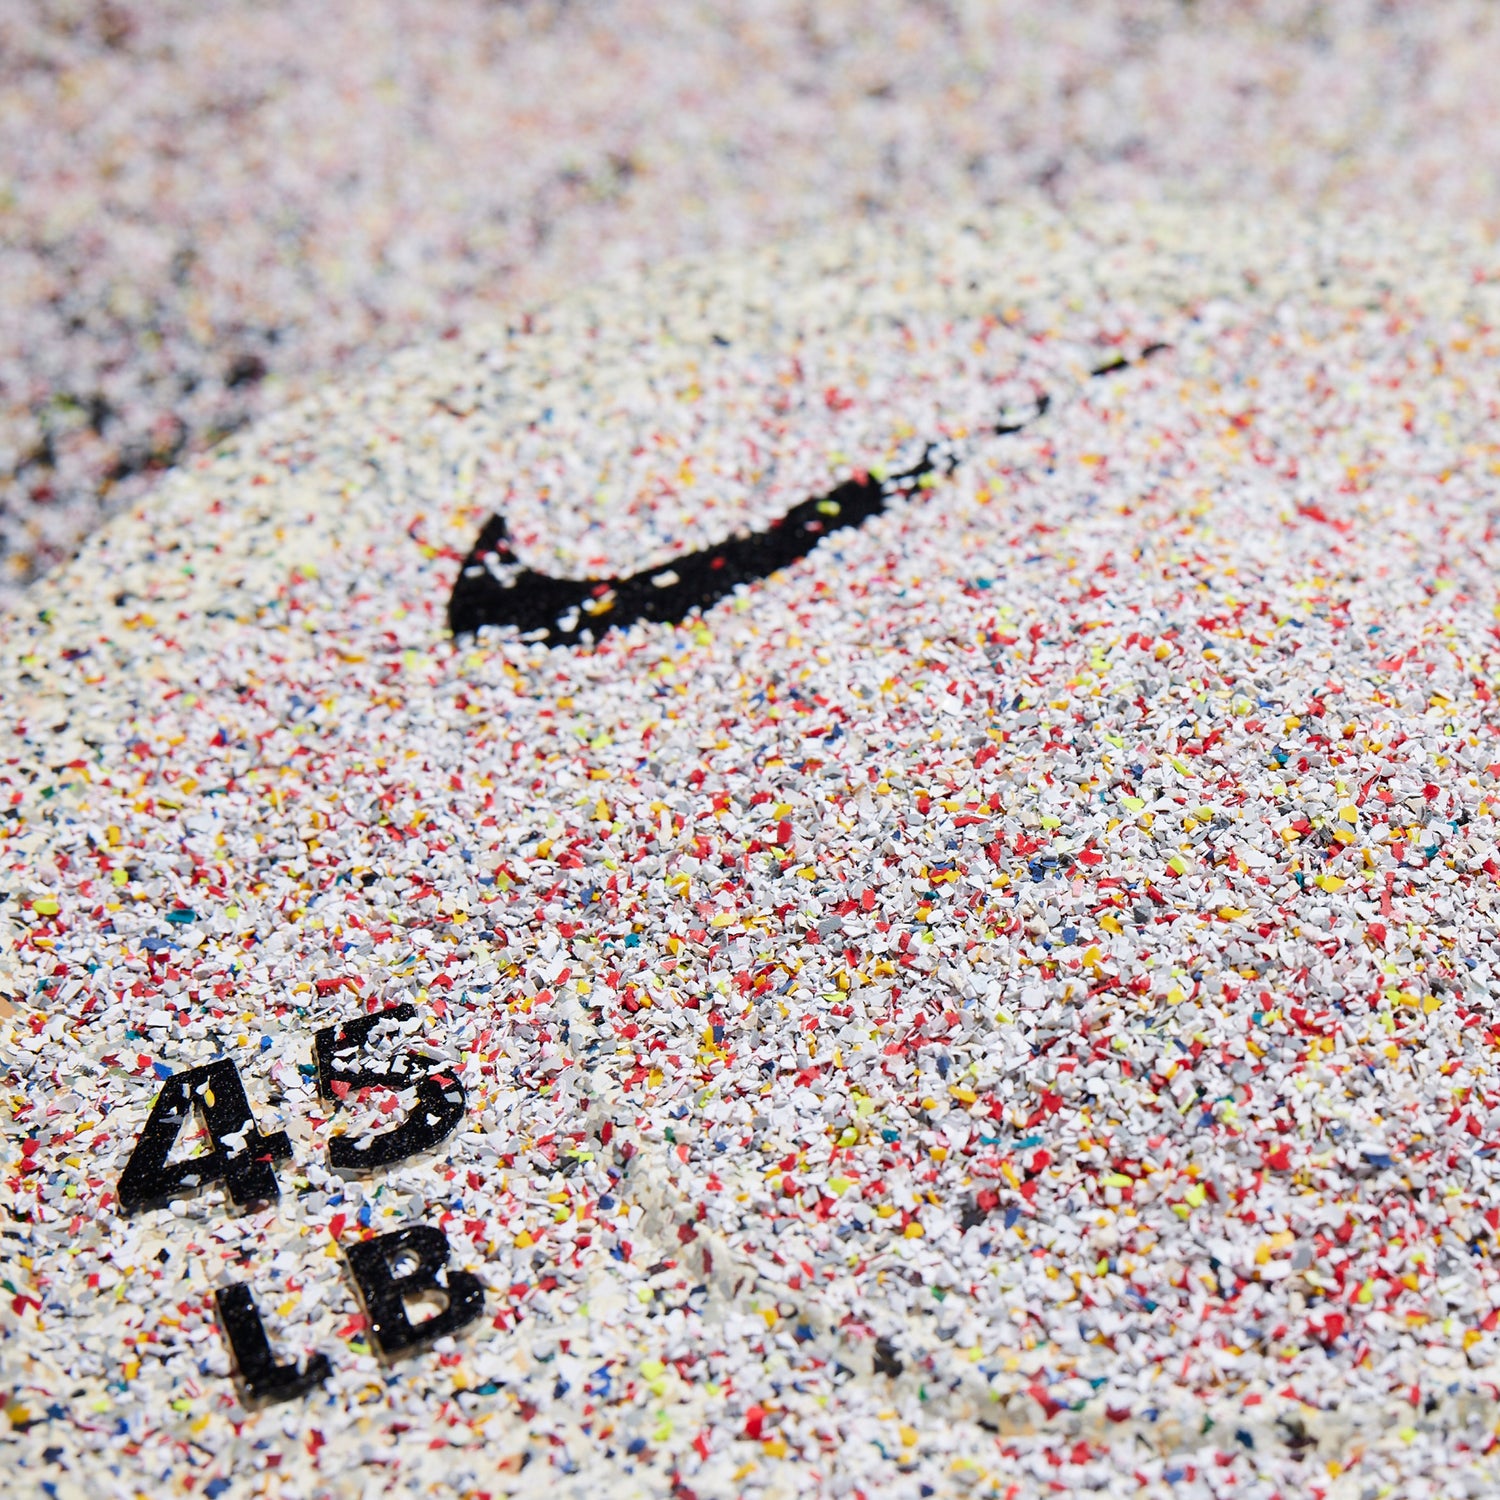 The Nike Rubber Bumper Plate (Grind) 45 LB plate shown with rubber scrap granules from Nike manufacturing